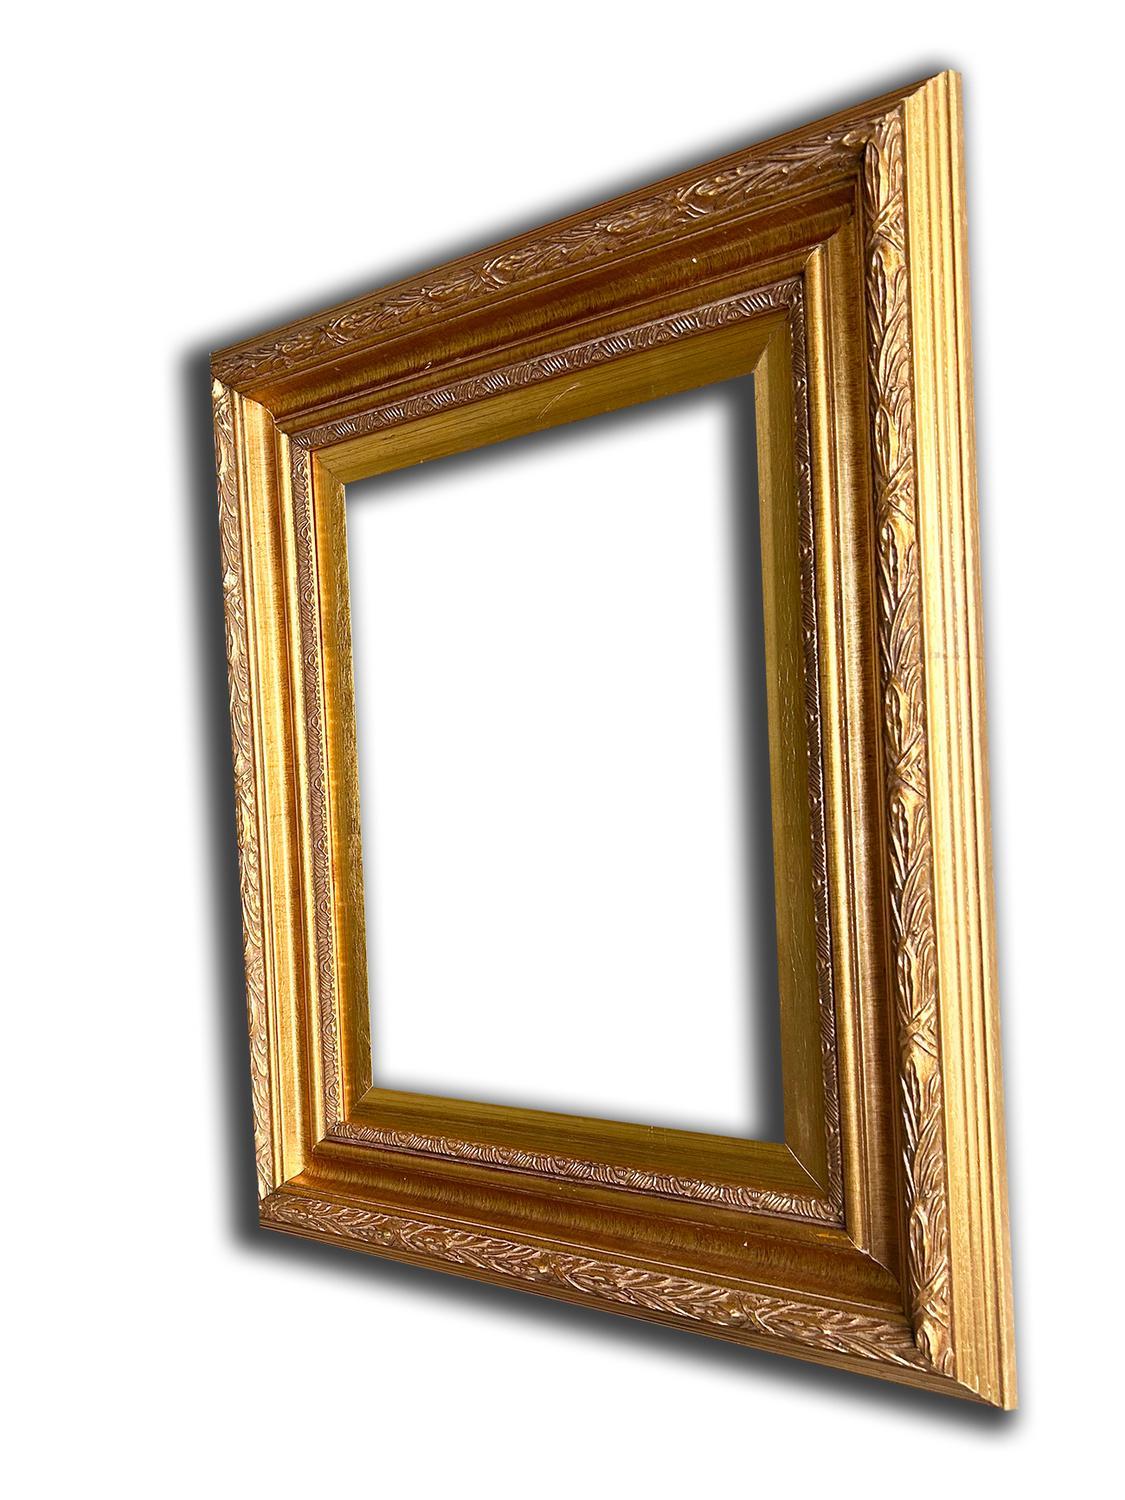 30x40 cm or 12x16 ins, wooden photo frame